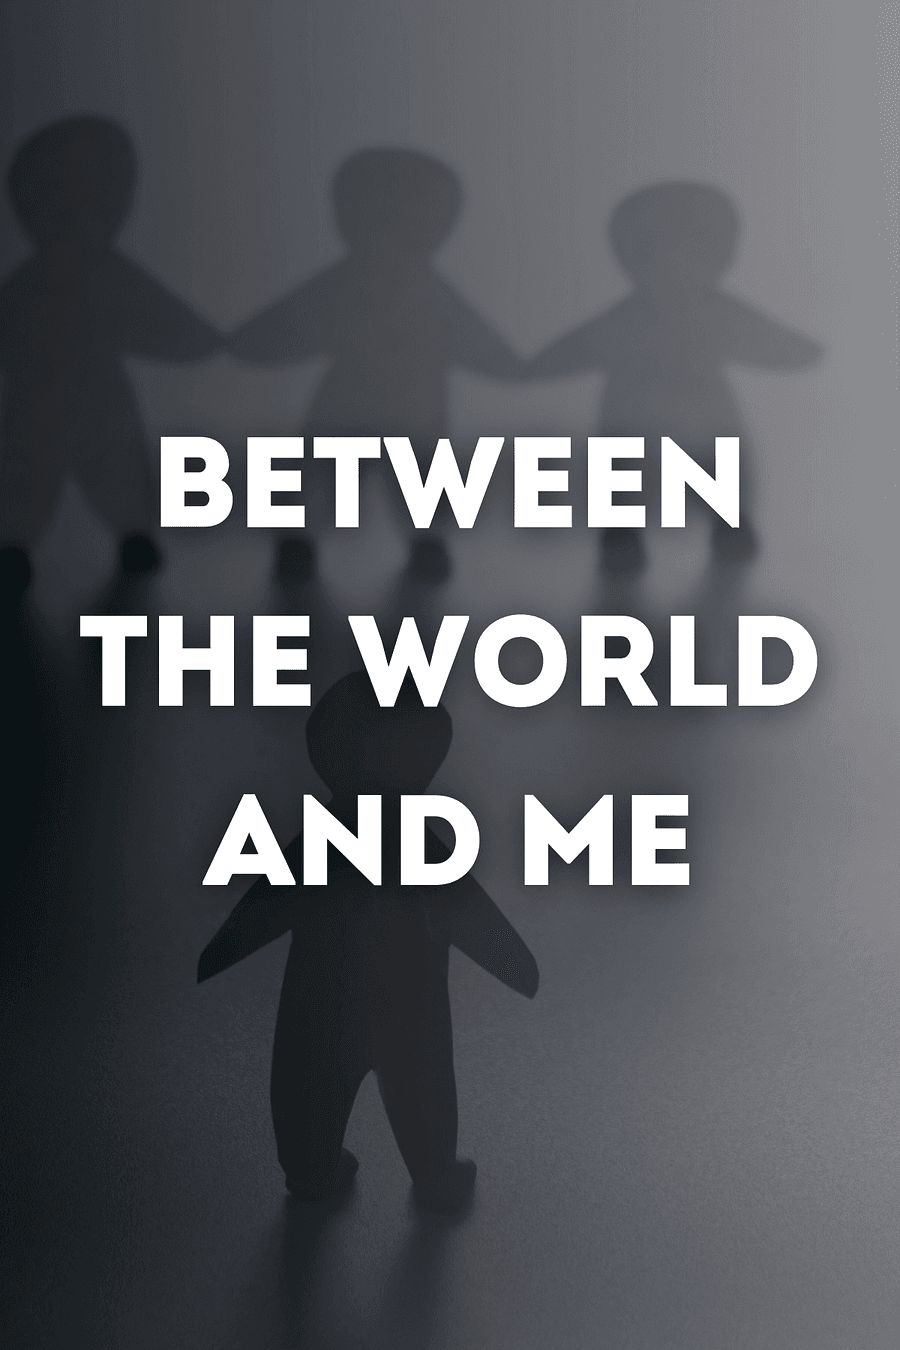 Between the World and Me by Ta-Nehisi Coates - Book Summary